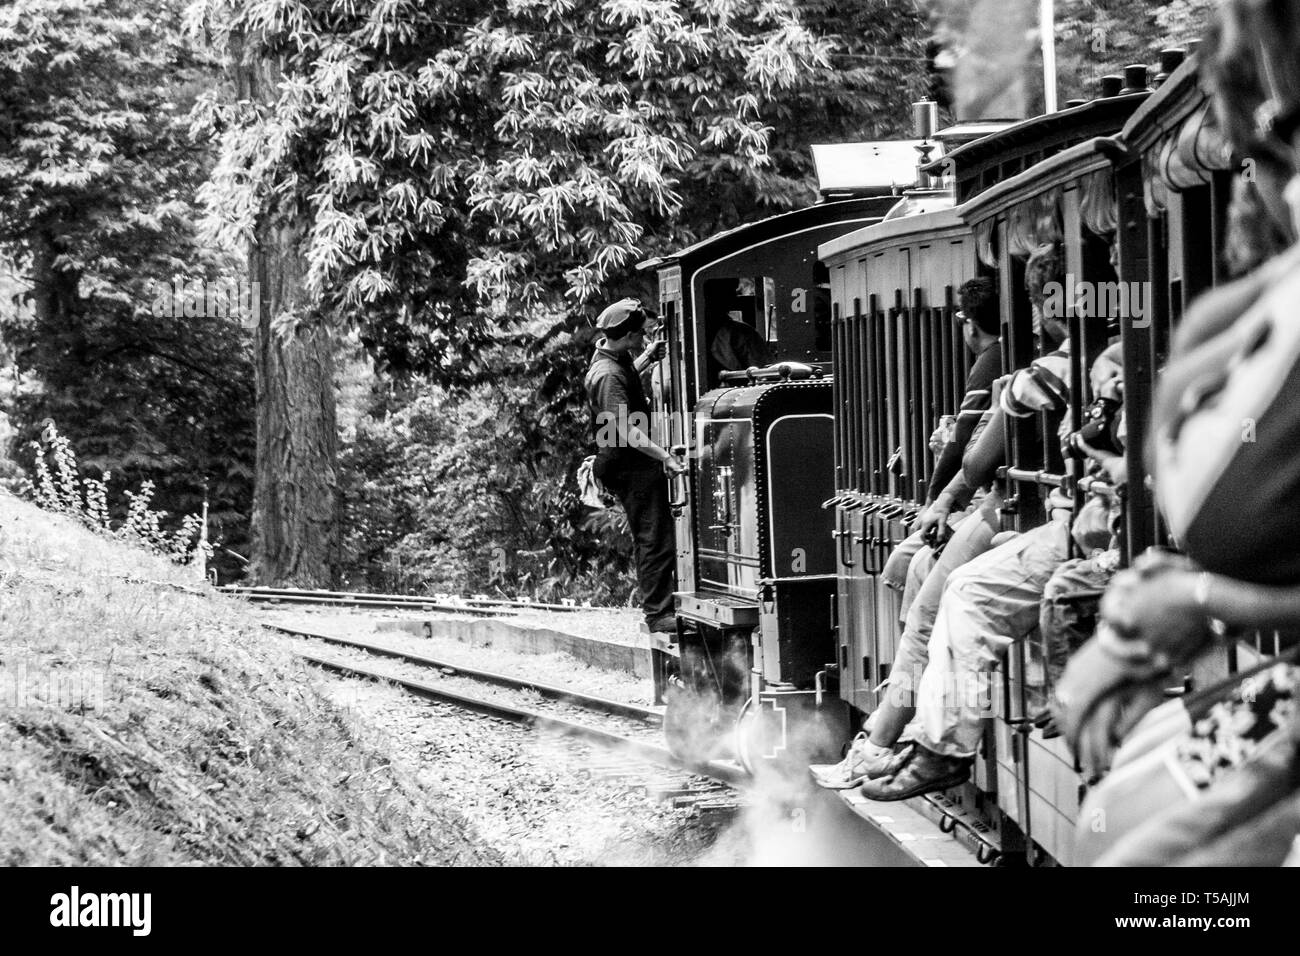 Belgrave, Victoria, Australia - January 7, 2009: Puffing Billy steam train with passengers. Historical narrow railway in the Dandenong Ranges. Stock Photo